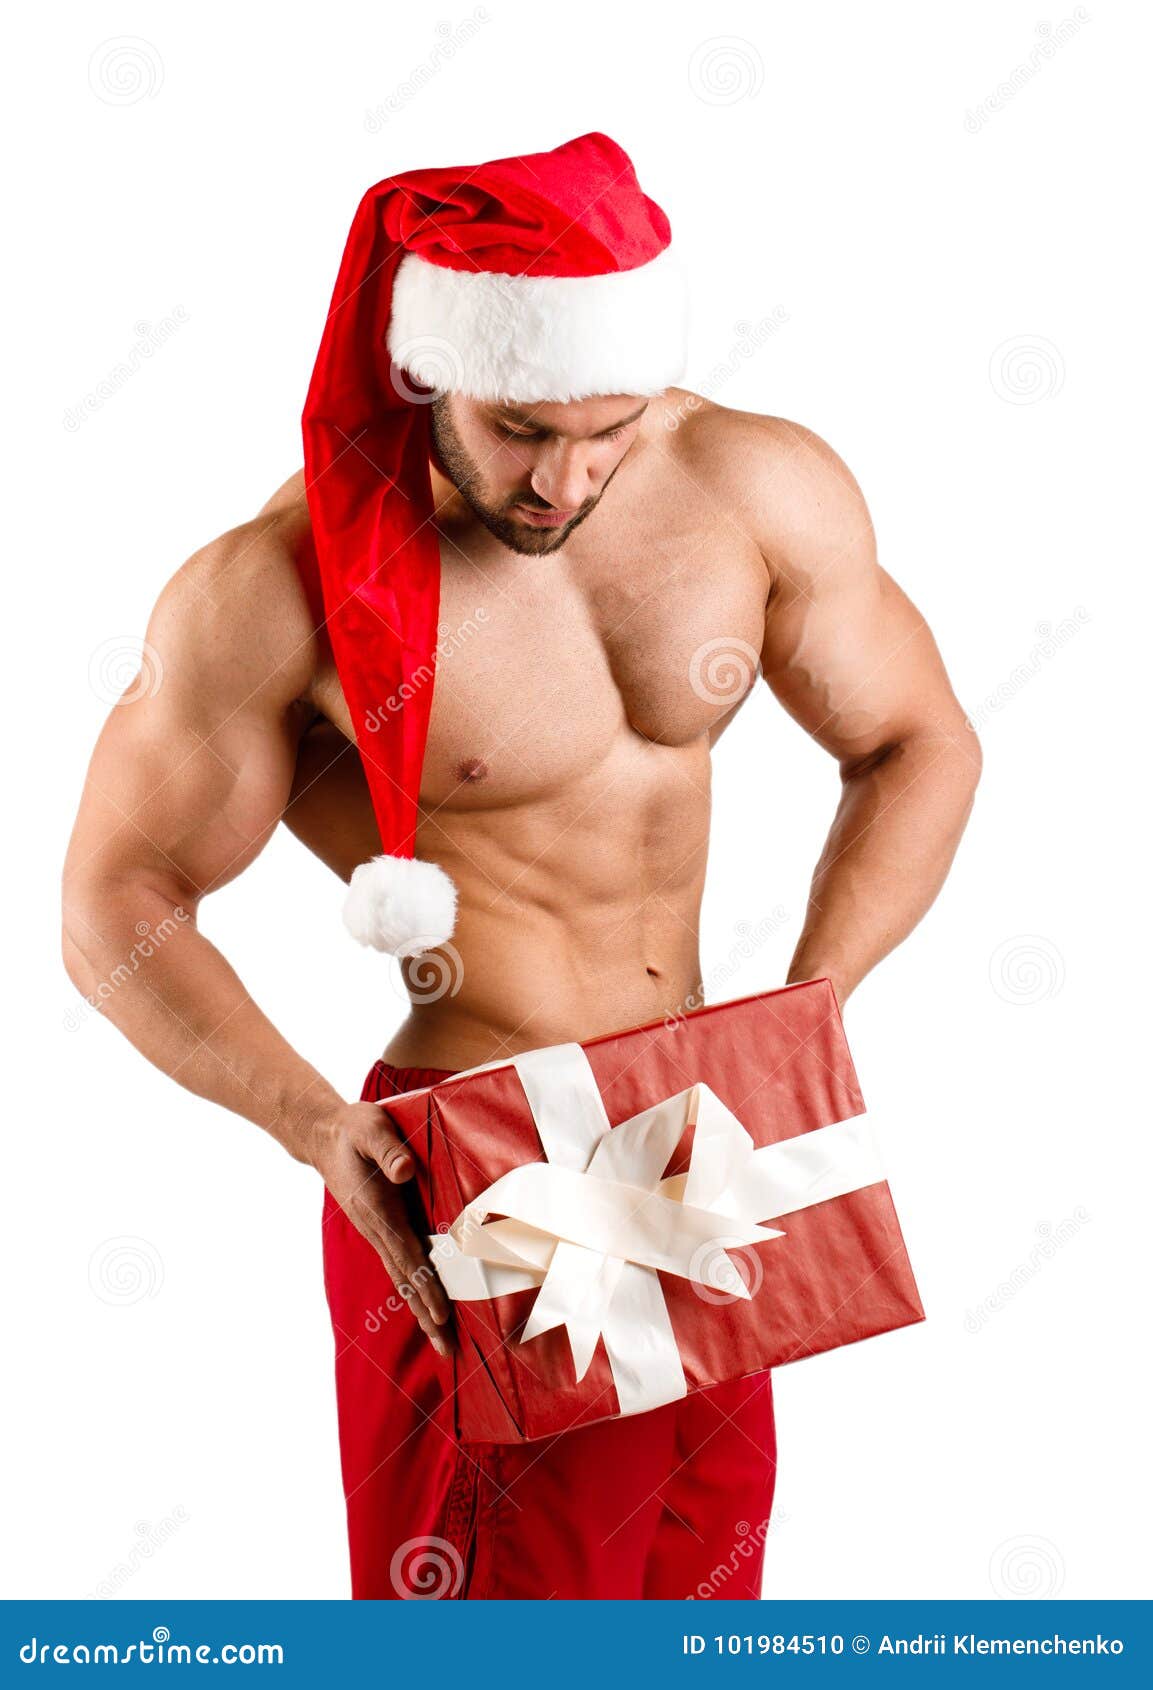 Image result for photos of sexy santa men&quot;